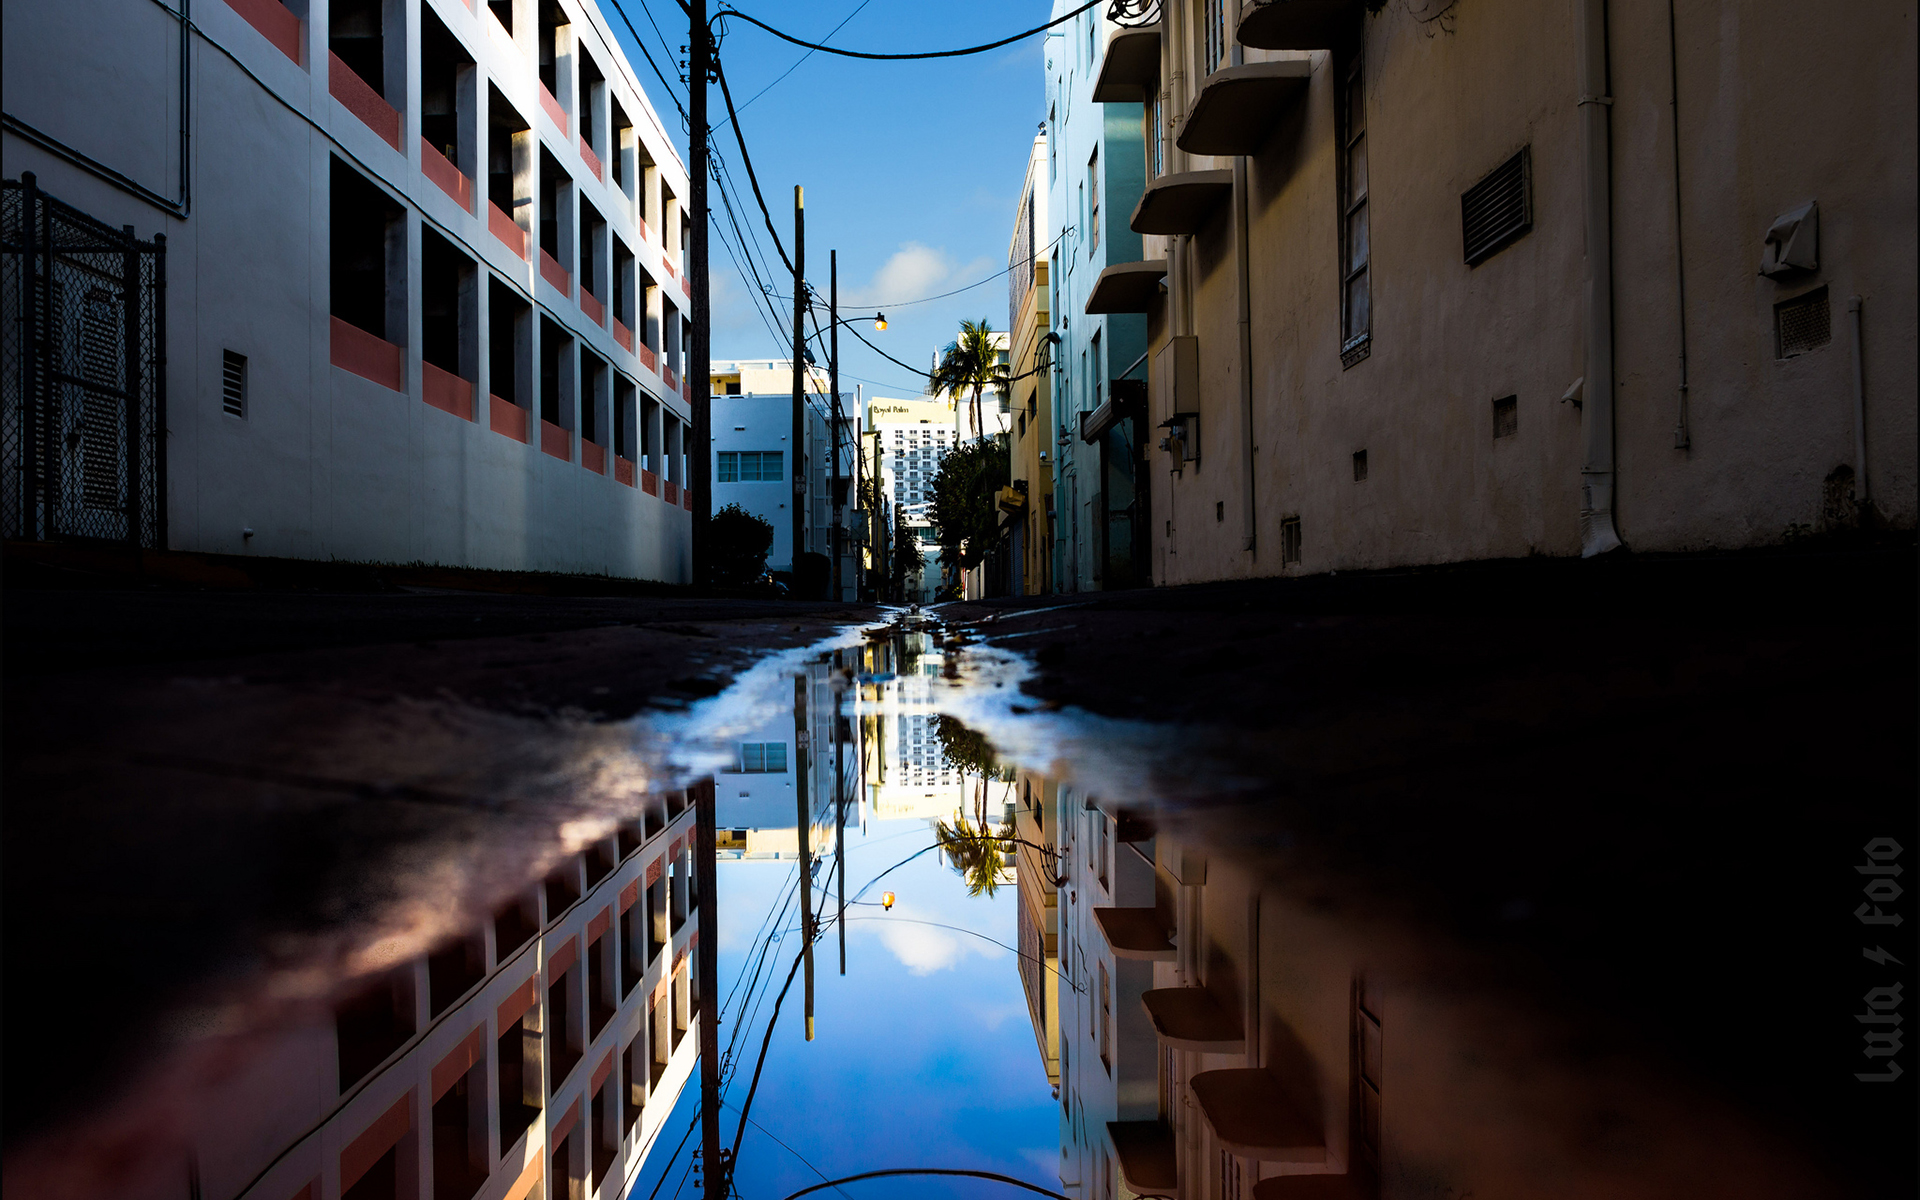 buildings, Puddle, Reflection, Alley Wallpaper